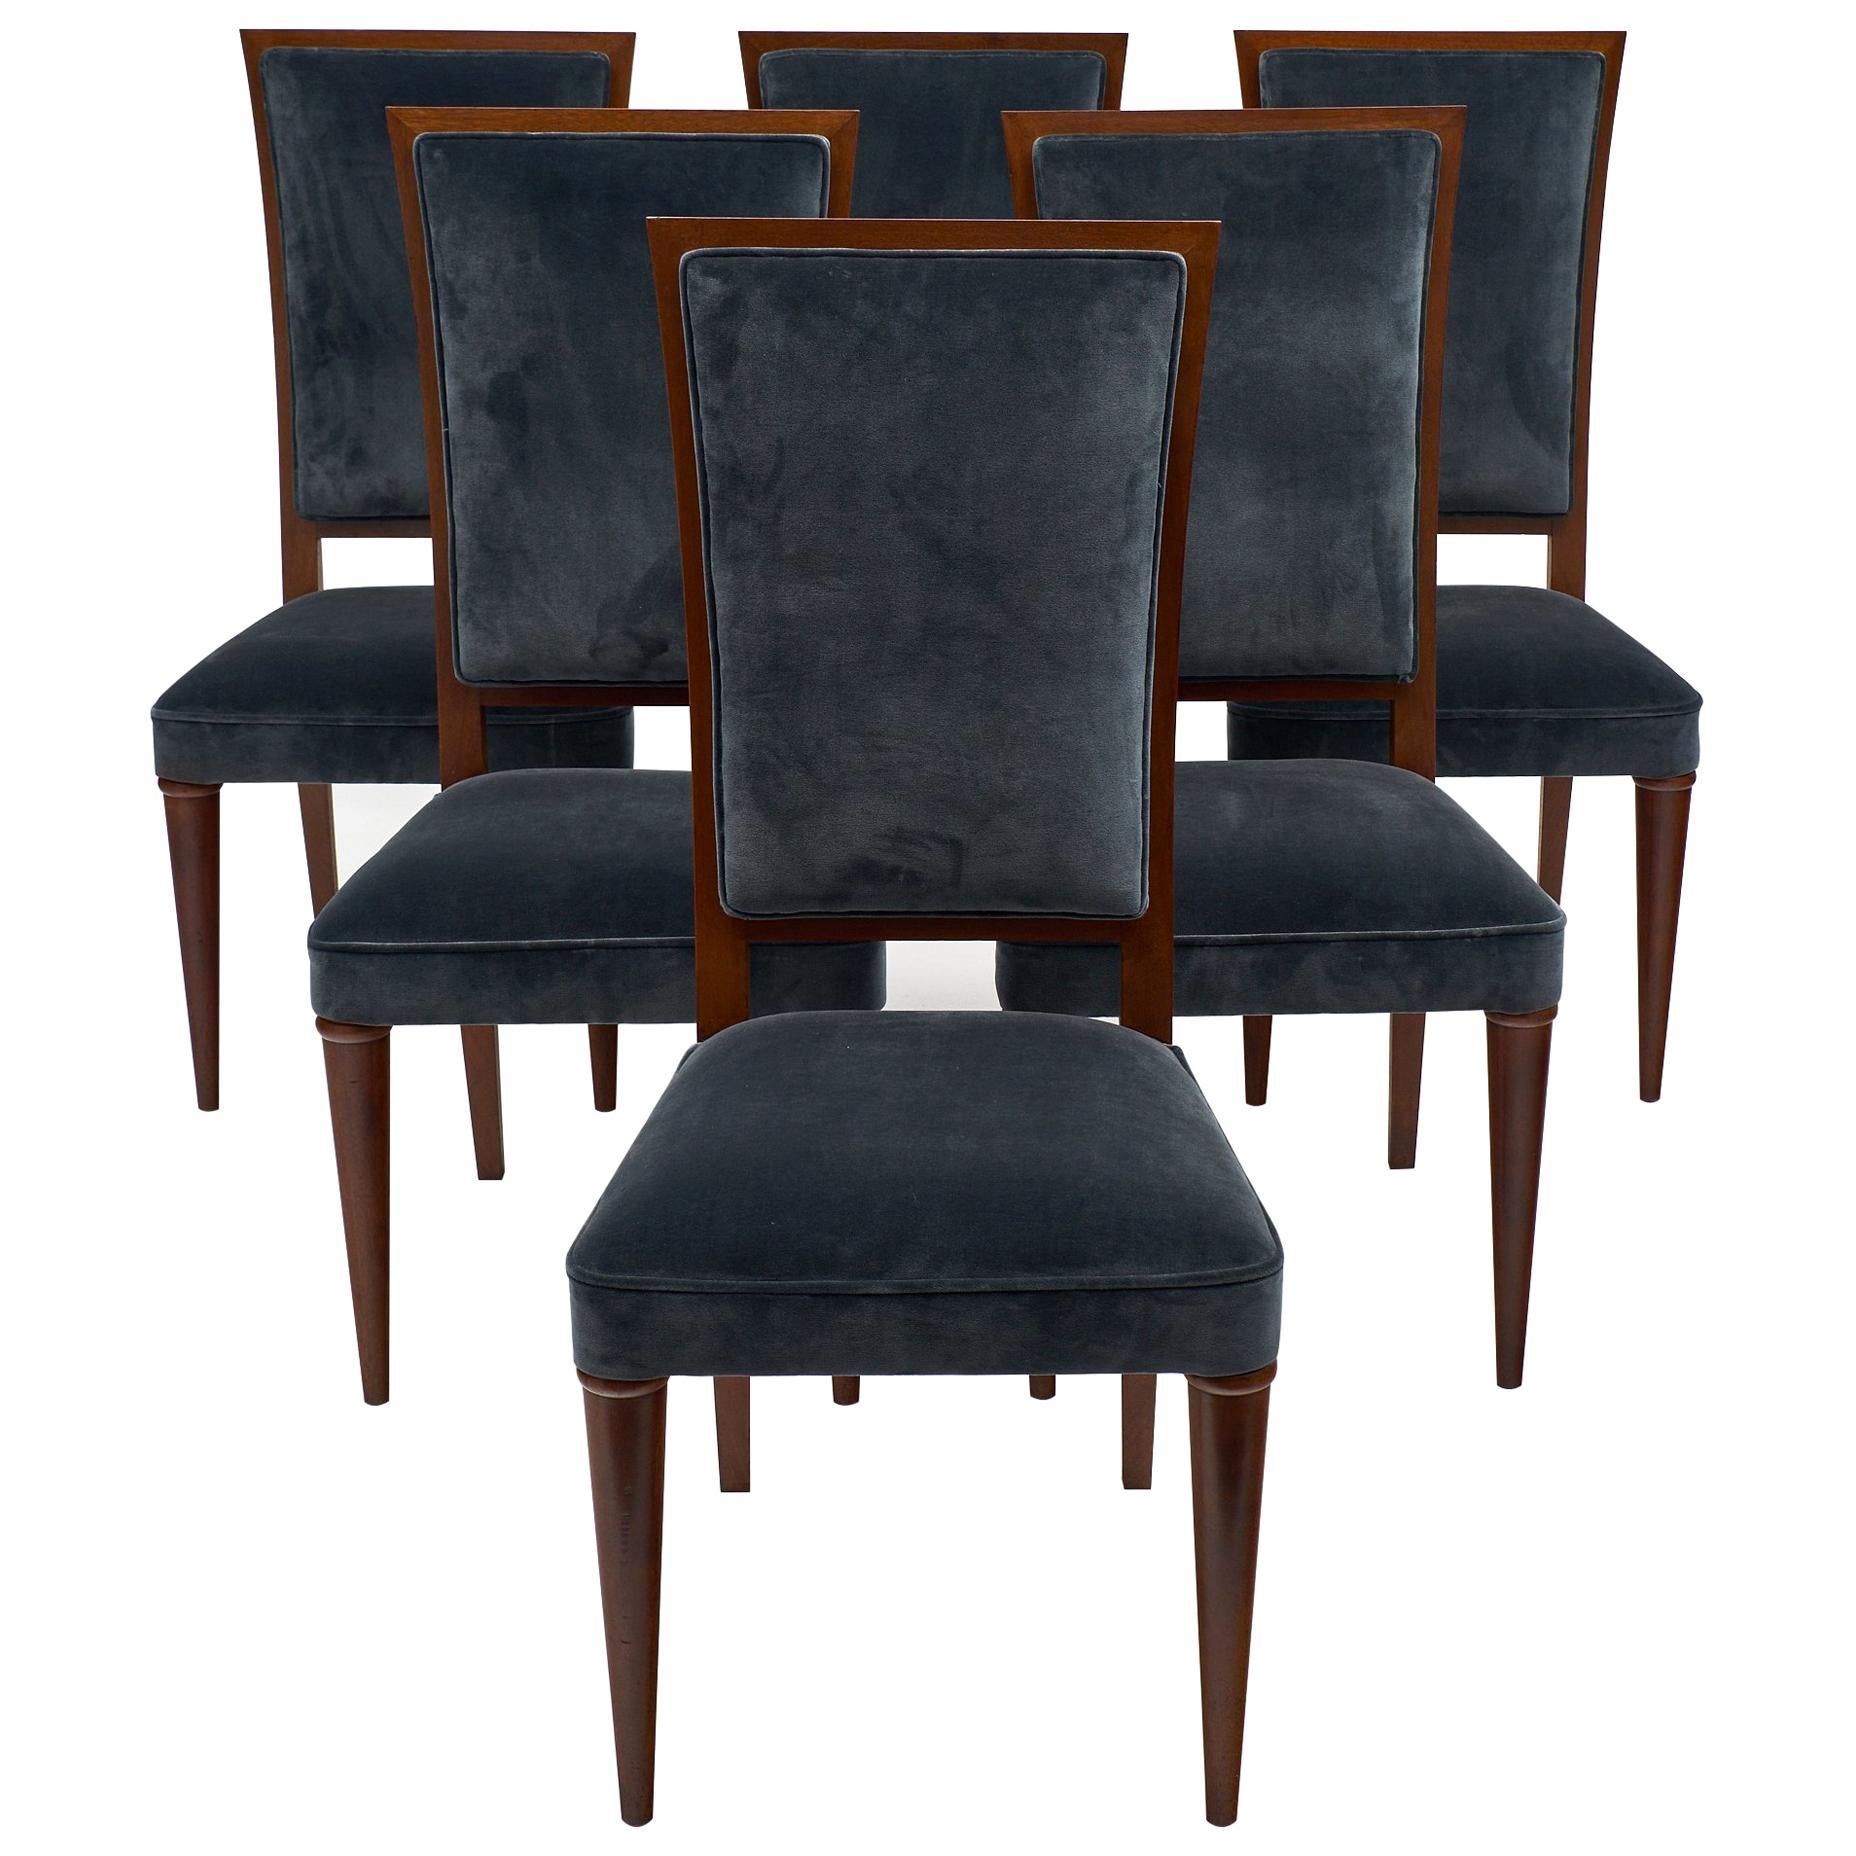 Art Deco Period French Mahogany Chairs